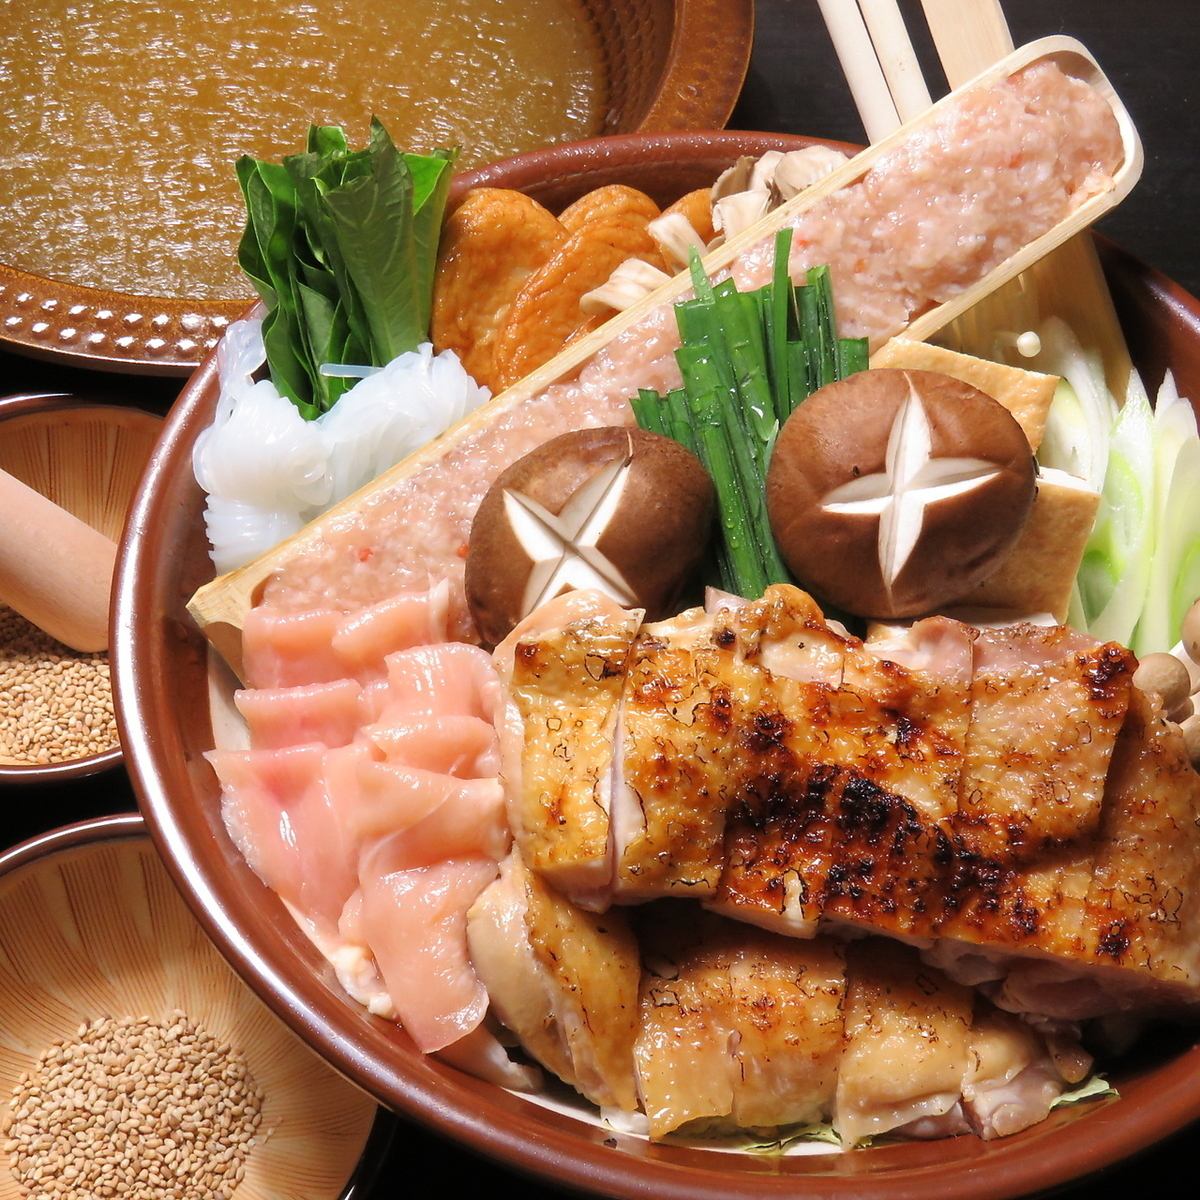 We offer a variety of exquisite dishes, including our special Chanko Nabe and Offal Hot Pot, as well as Asahikawa's specialty, Shinkoyaki!